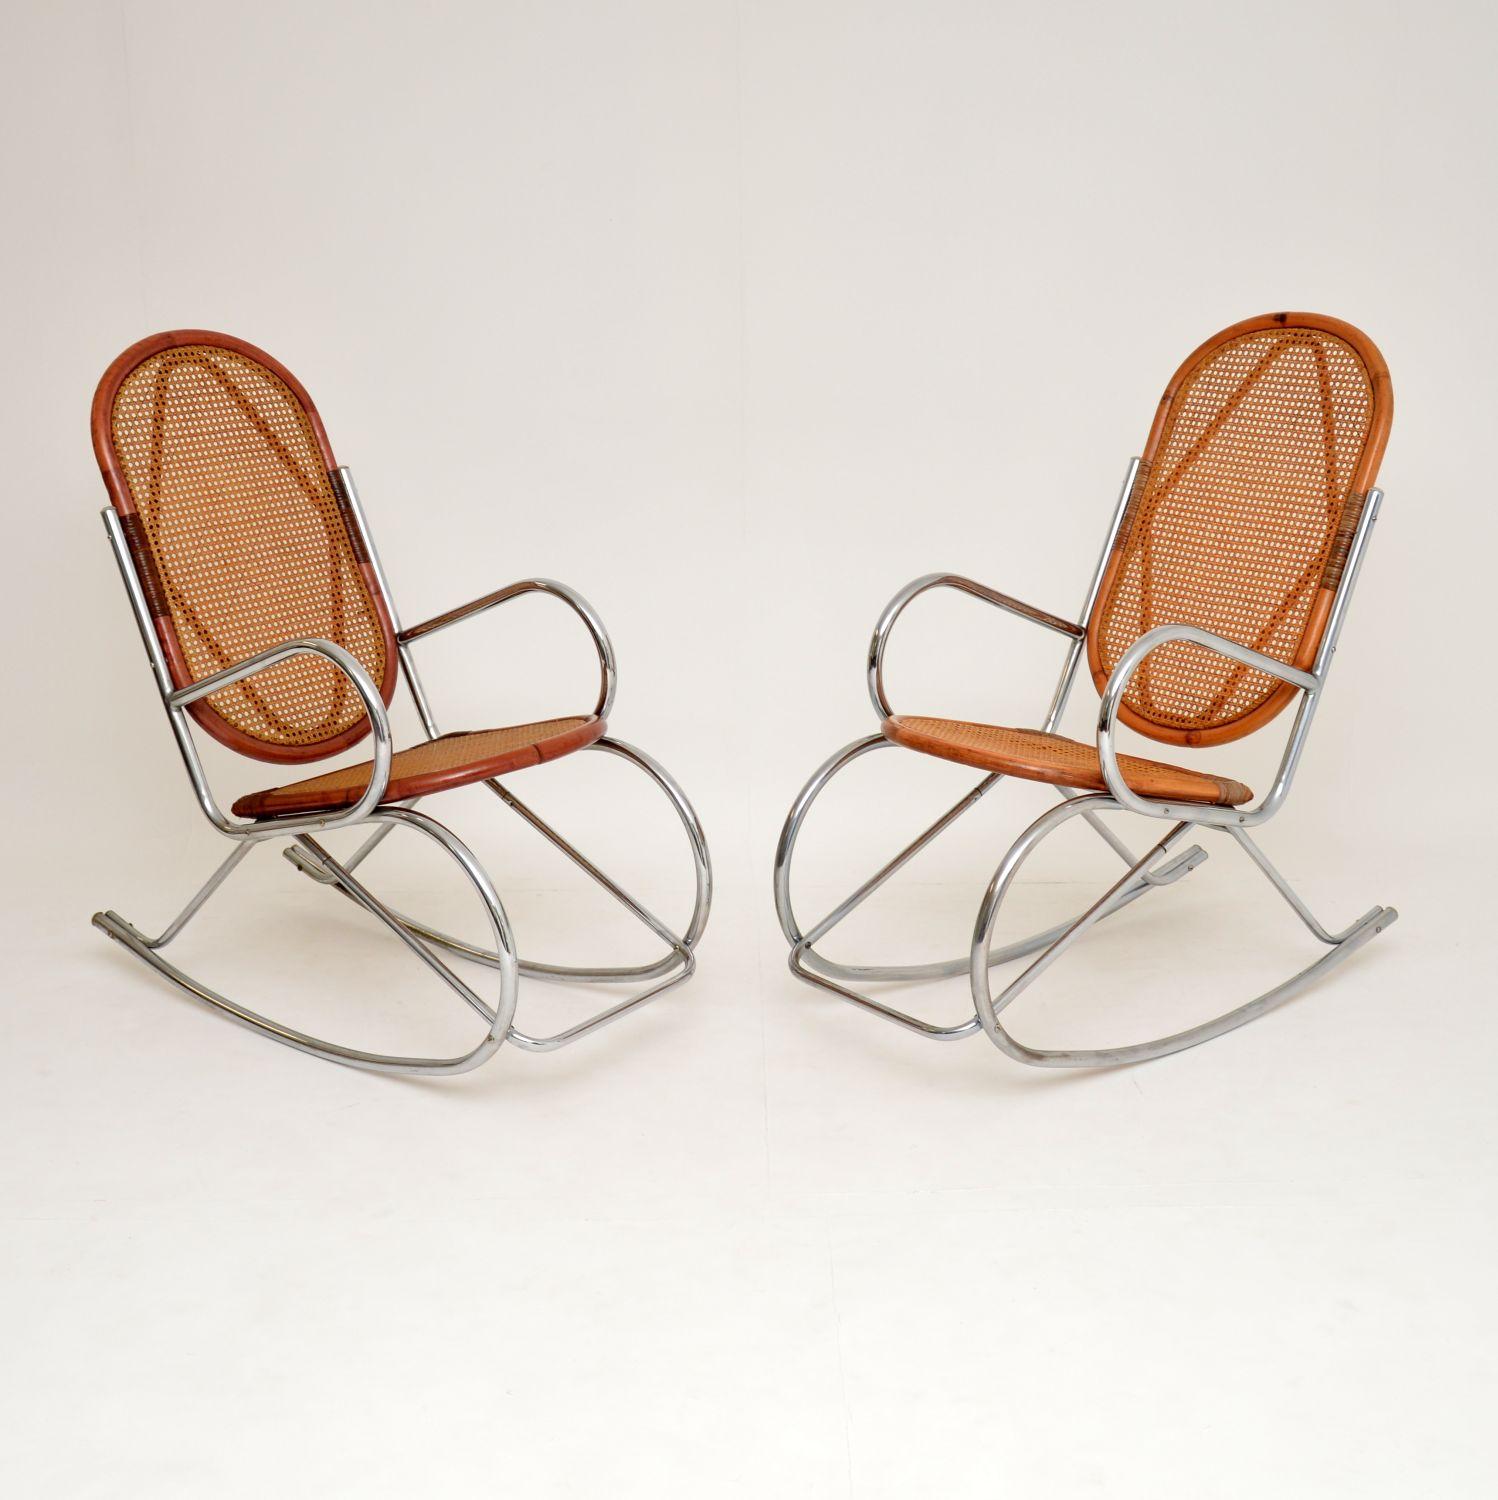 A beautiful and unusual pair of vintage retro rocking chairs, these date from the 1970s. They have tubular steel frames, with cane and bamboo seats. The condition is great for their age, with only some minor wear here and there. One of the chairs